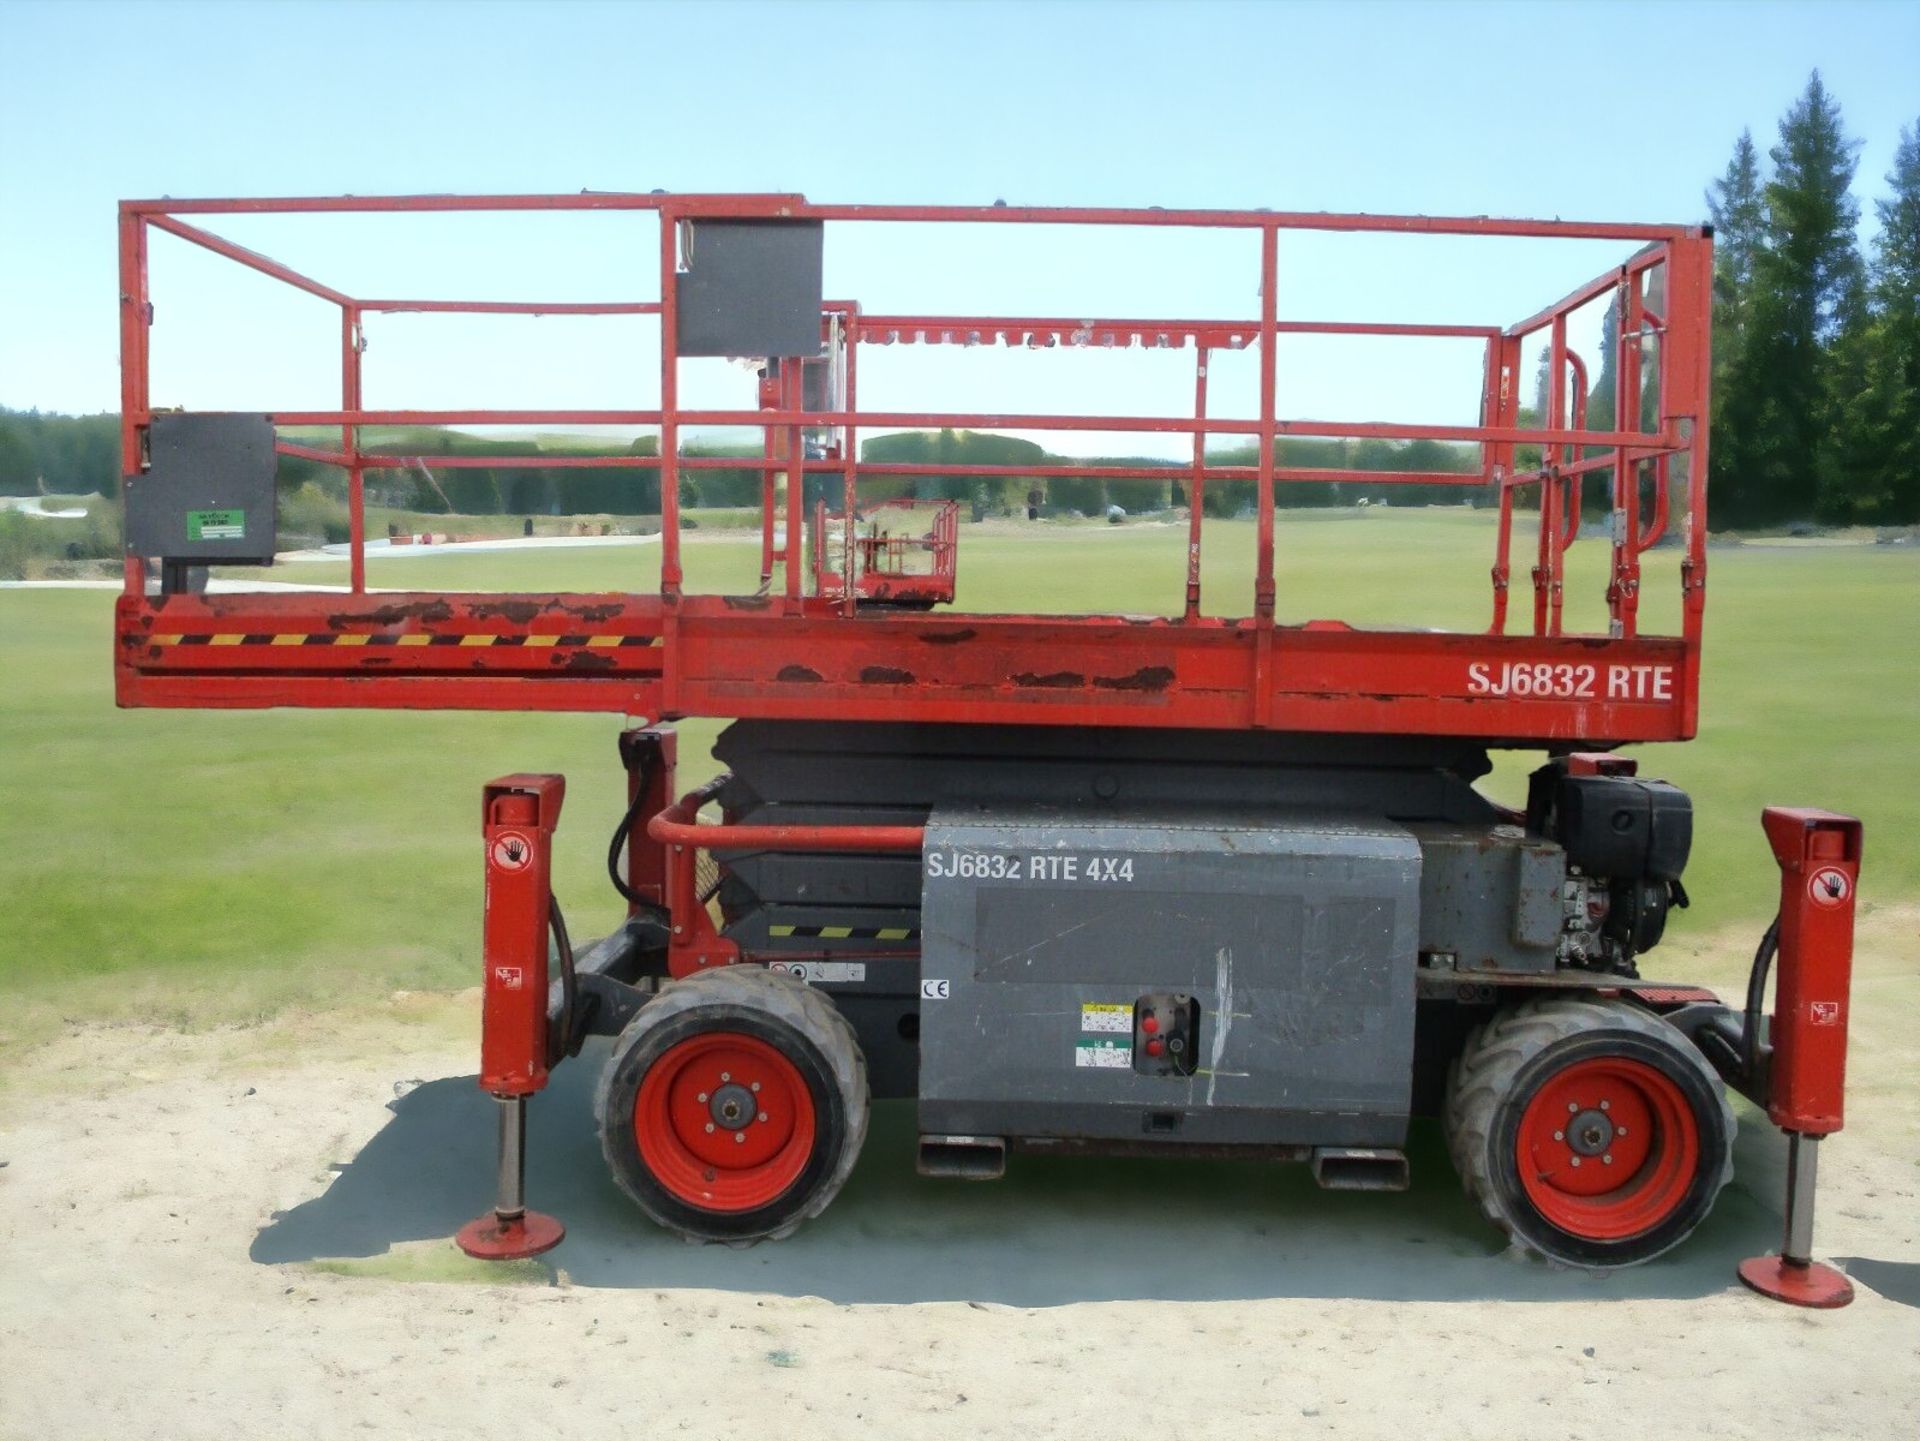 2014 SKYJACK SJ6832RTE SCISSOR LIFT - REACH NEW HEIGHTS WITH EFFICIENCY AND VERSATILITY - Image 3 of 15